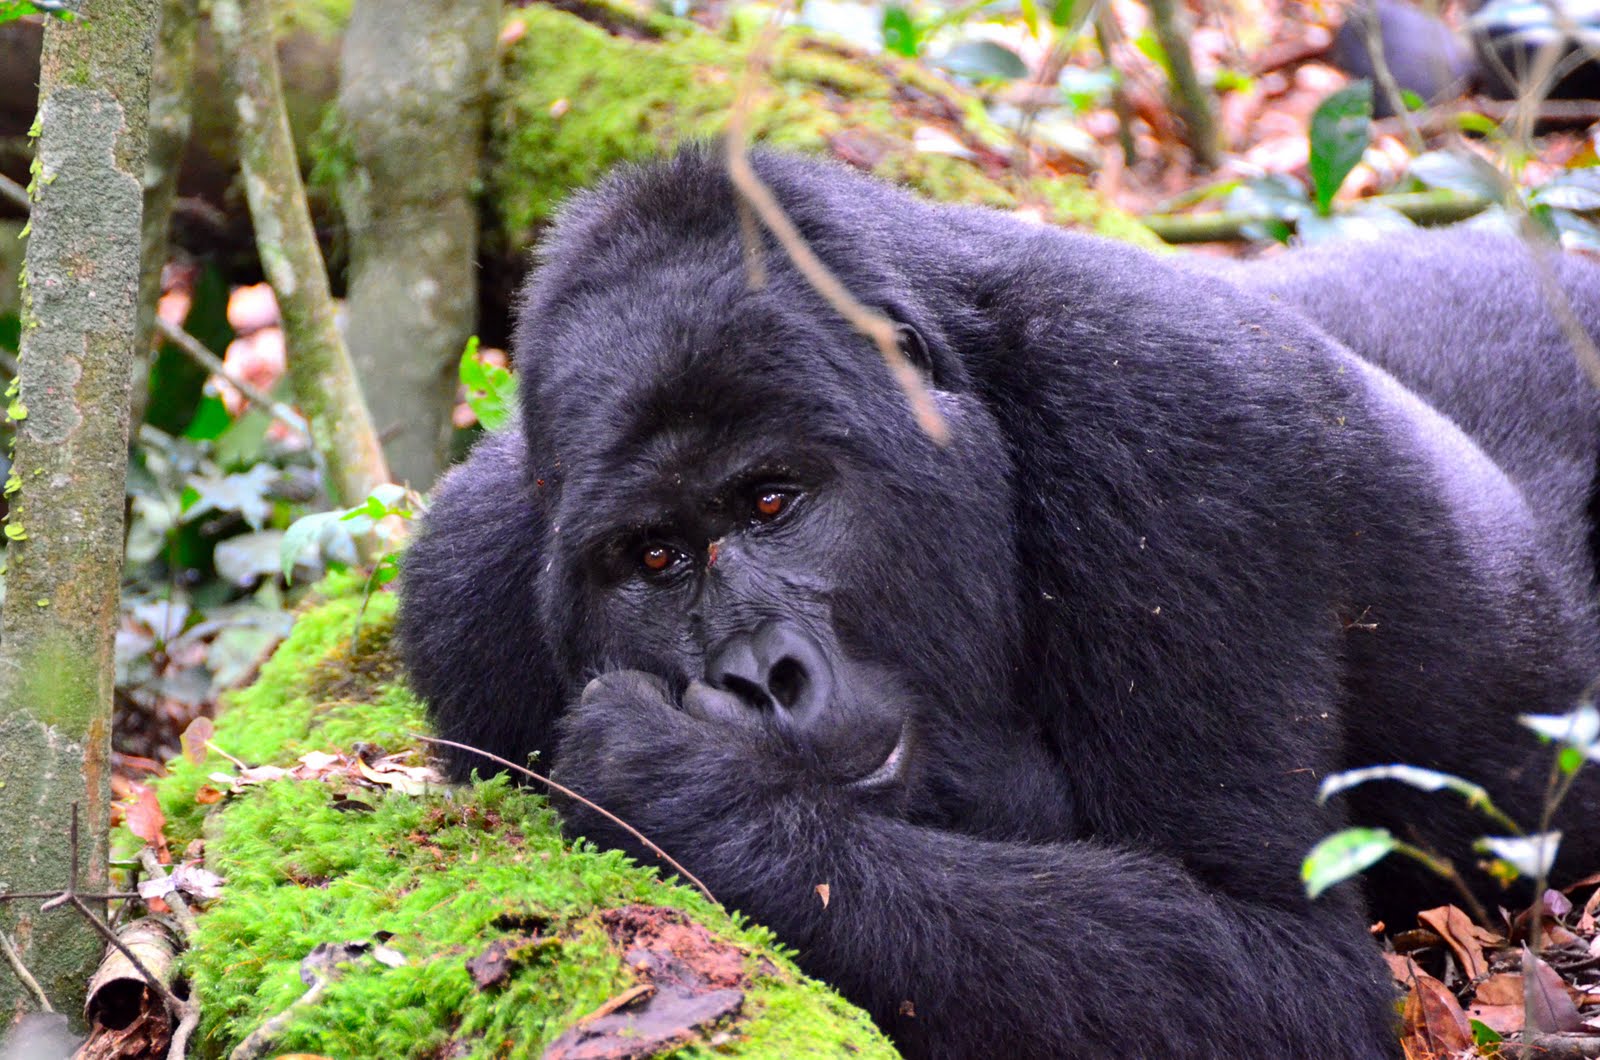 You can see more gorilla photos from the trip. 